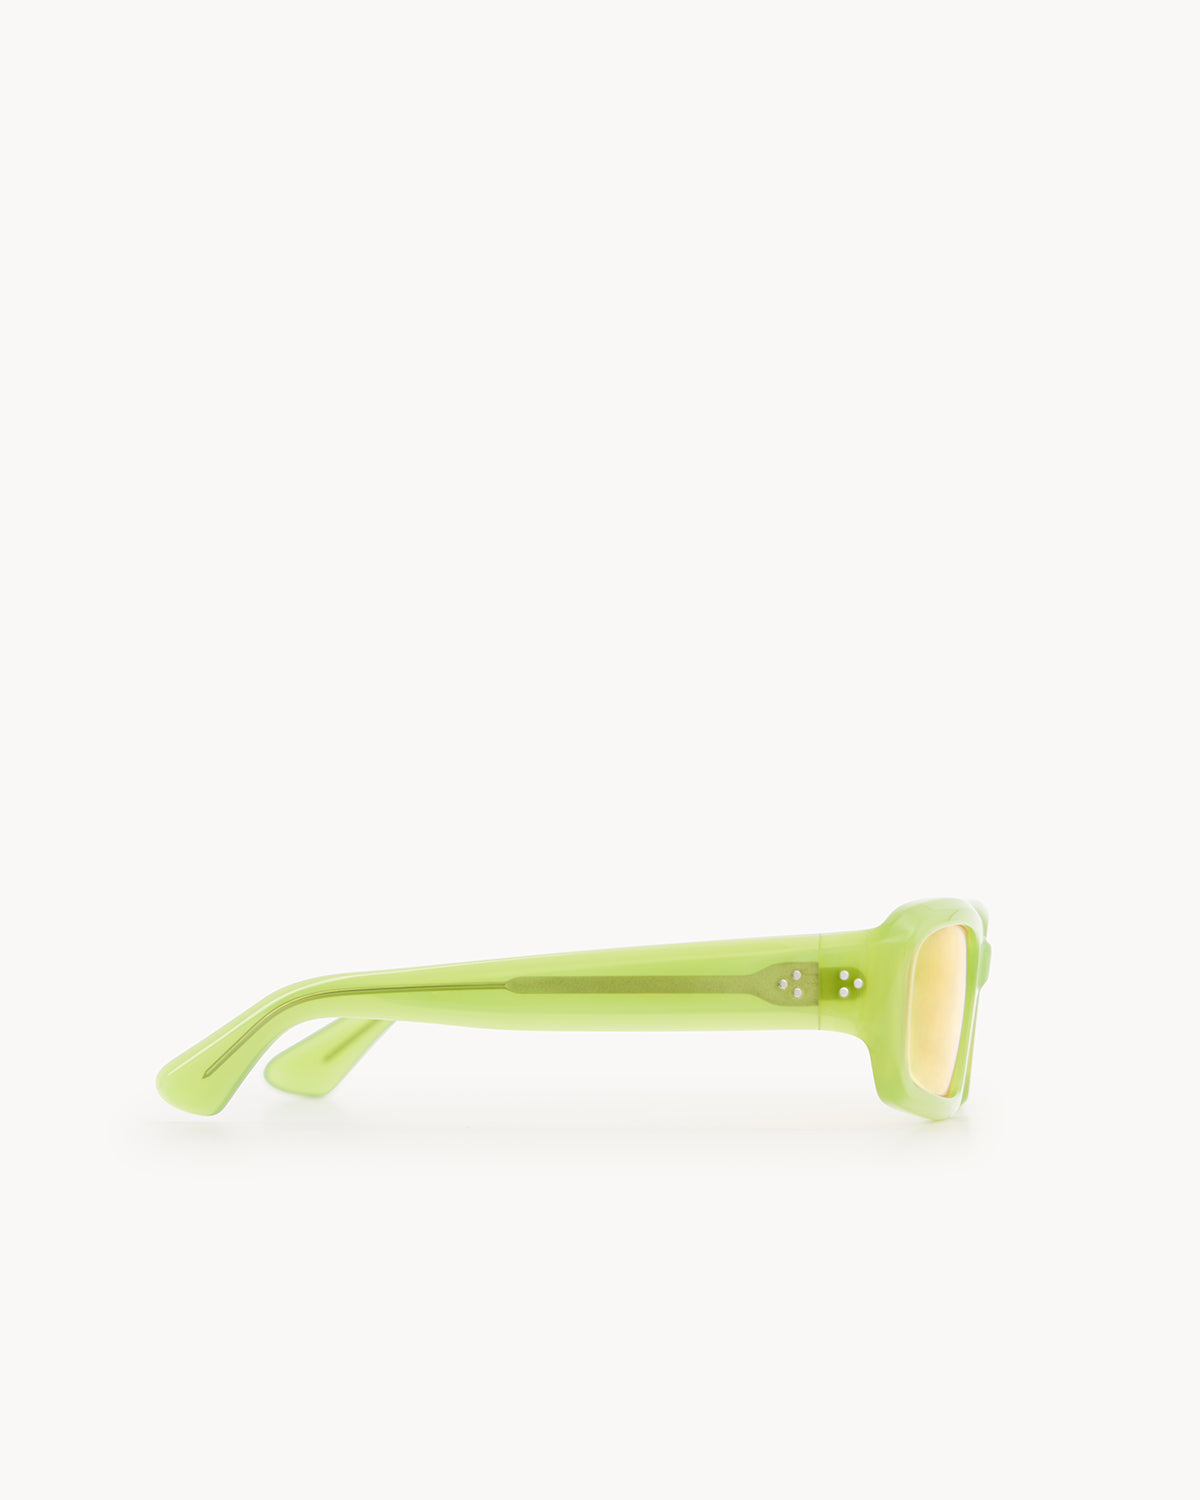 Port Tanger Mektoub Sunglasses in Lime Acetate and Warm Olive Lenses 4